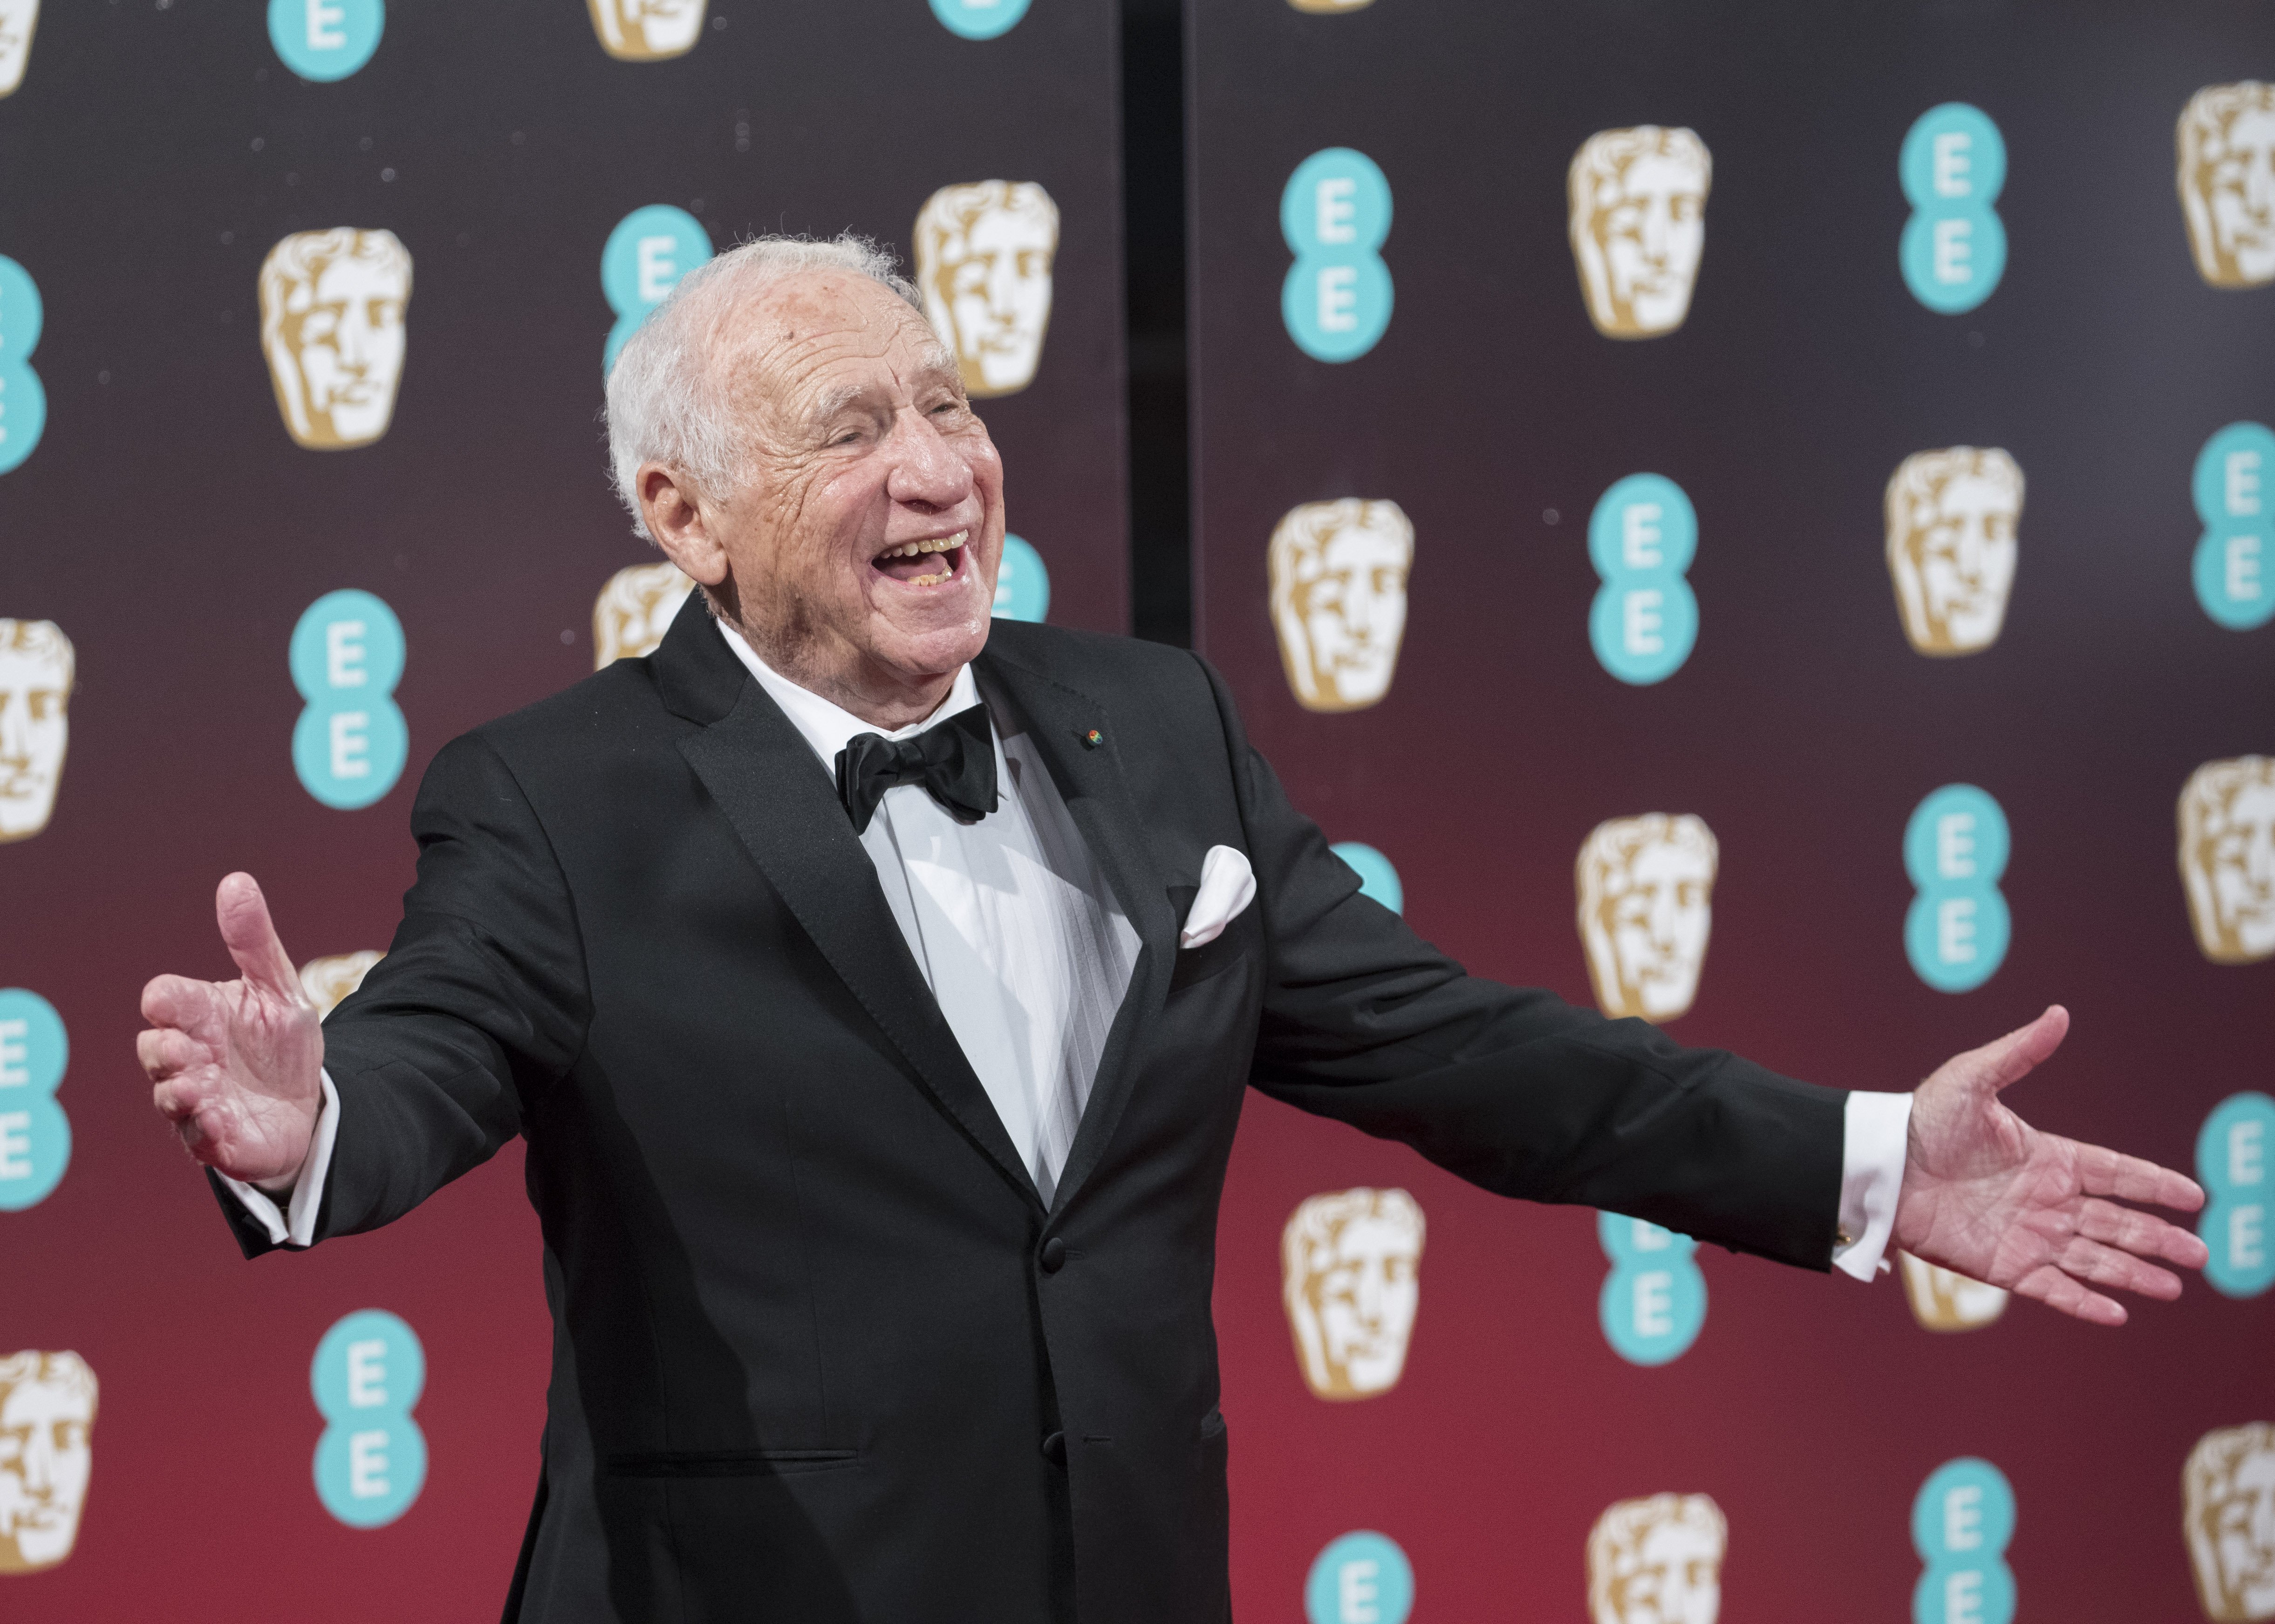 Mel Brooks at the 70th EE British Academy Film Awards (BAFTA) on February 12, 2017 in London. │Source: Getty Images  